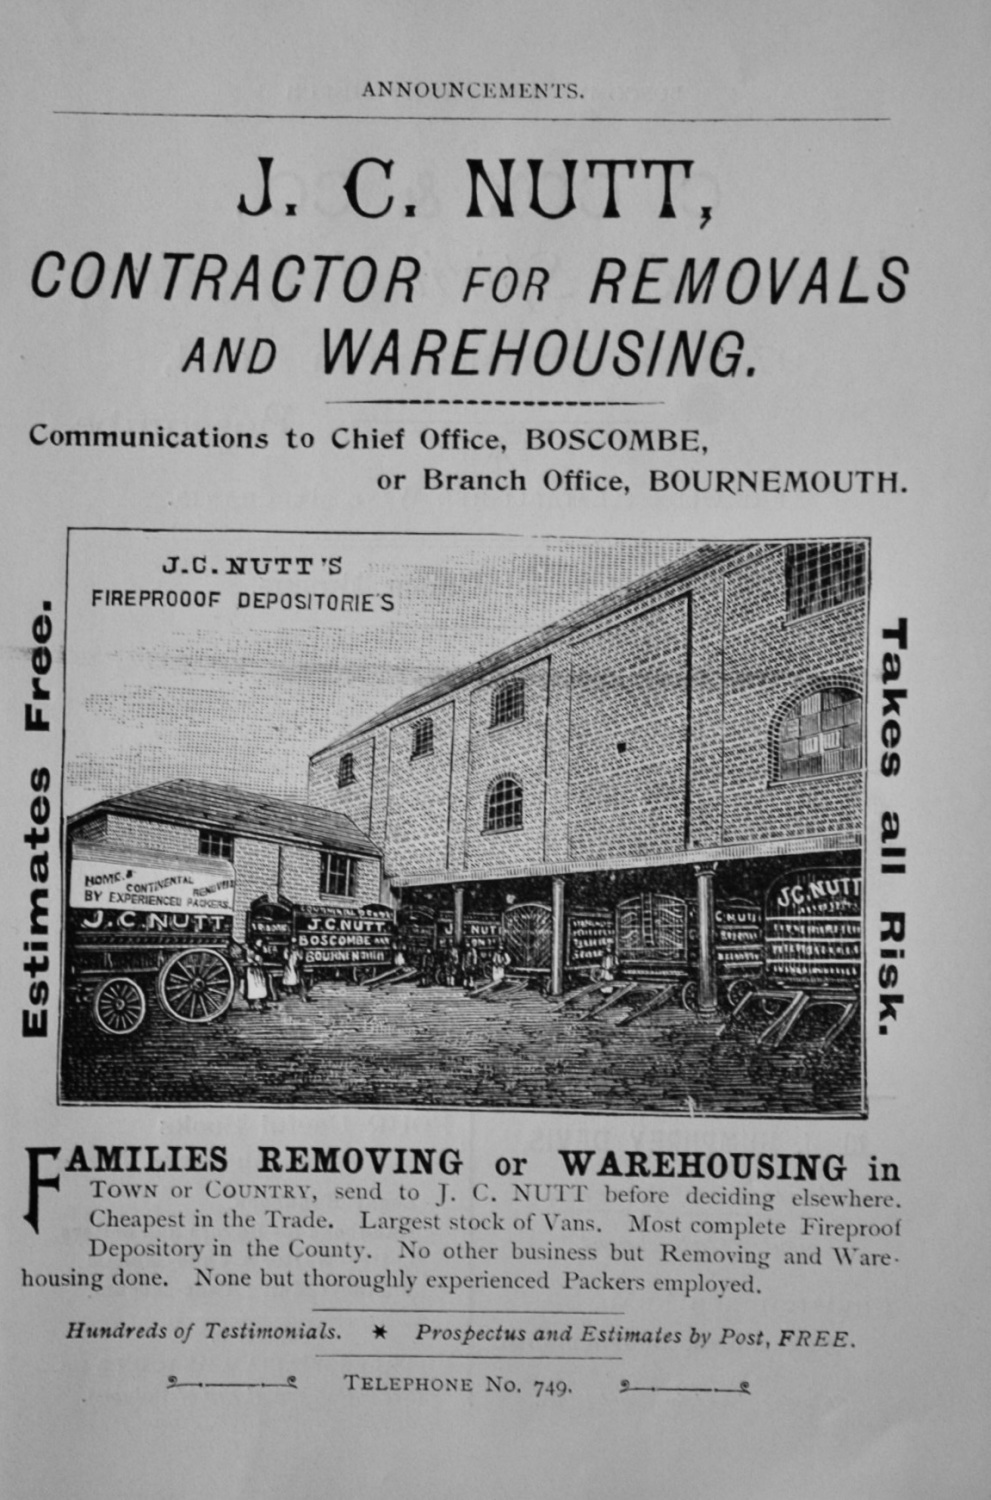 J. C. Nutt, Contractor for Removals and Warehousing. Communications to Chie